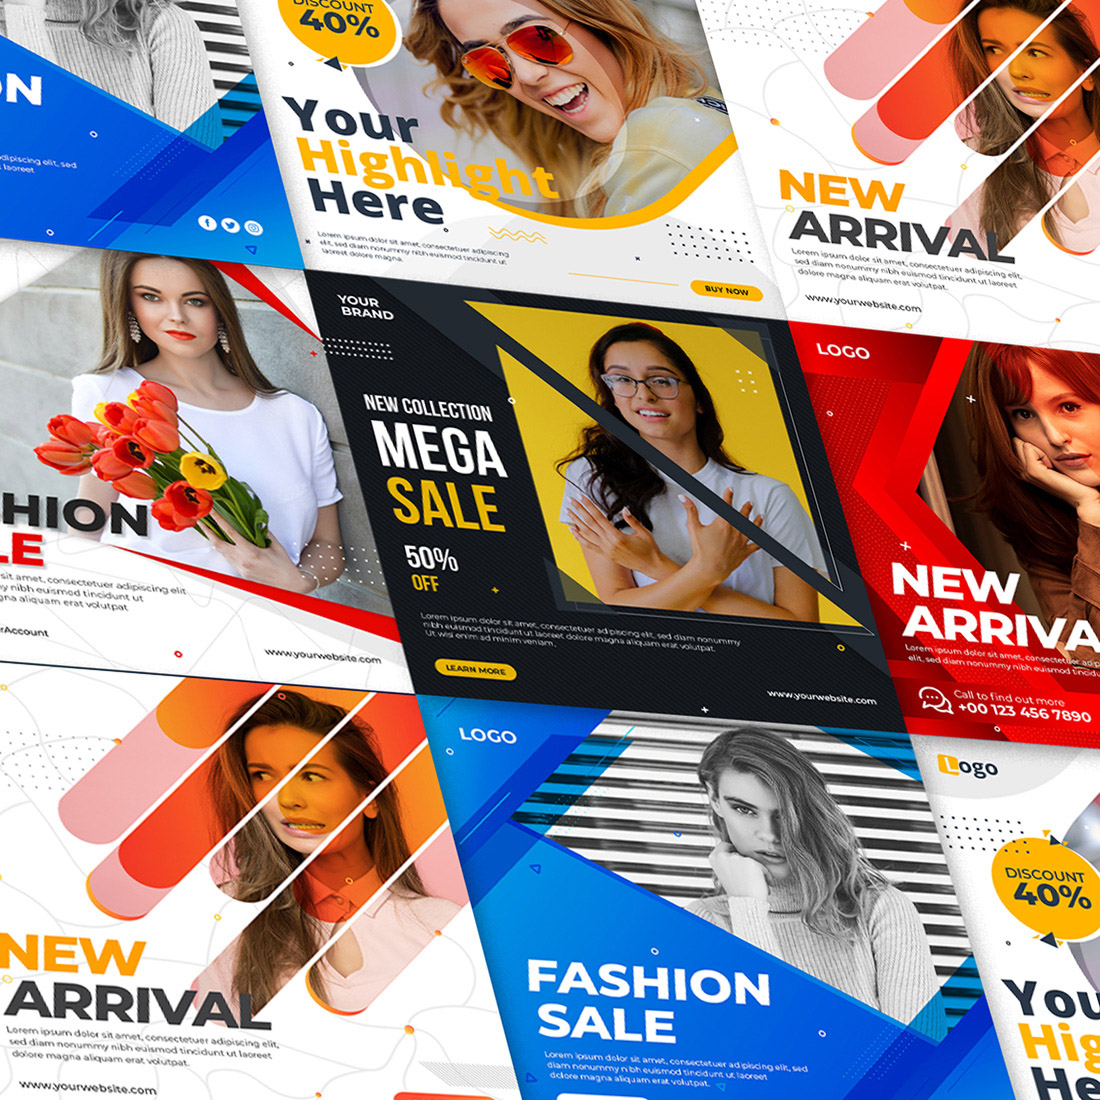 Fashion Sale Promotion Banner or Square Flyer for Social Media Post 6 Set Template cover image.